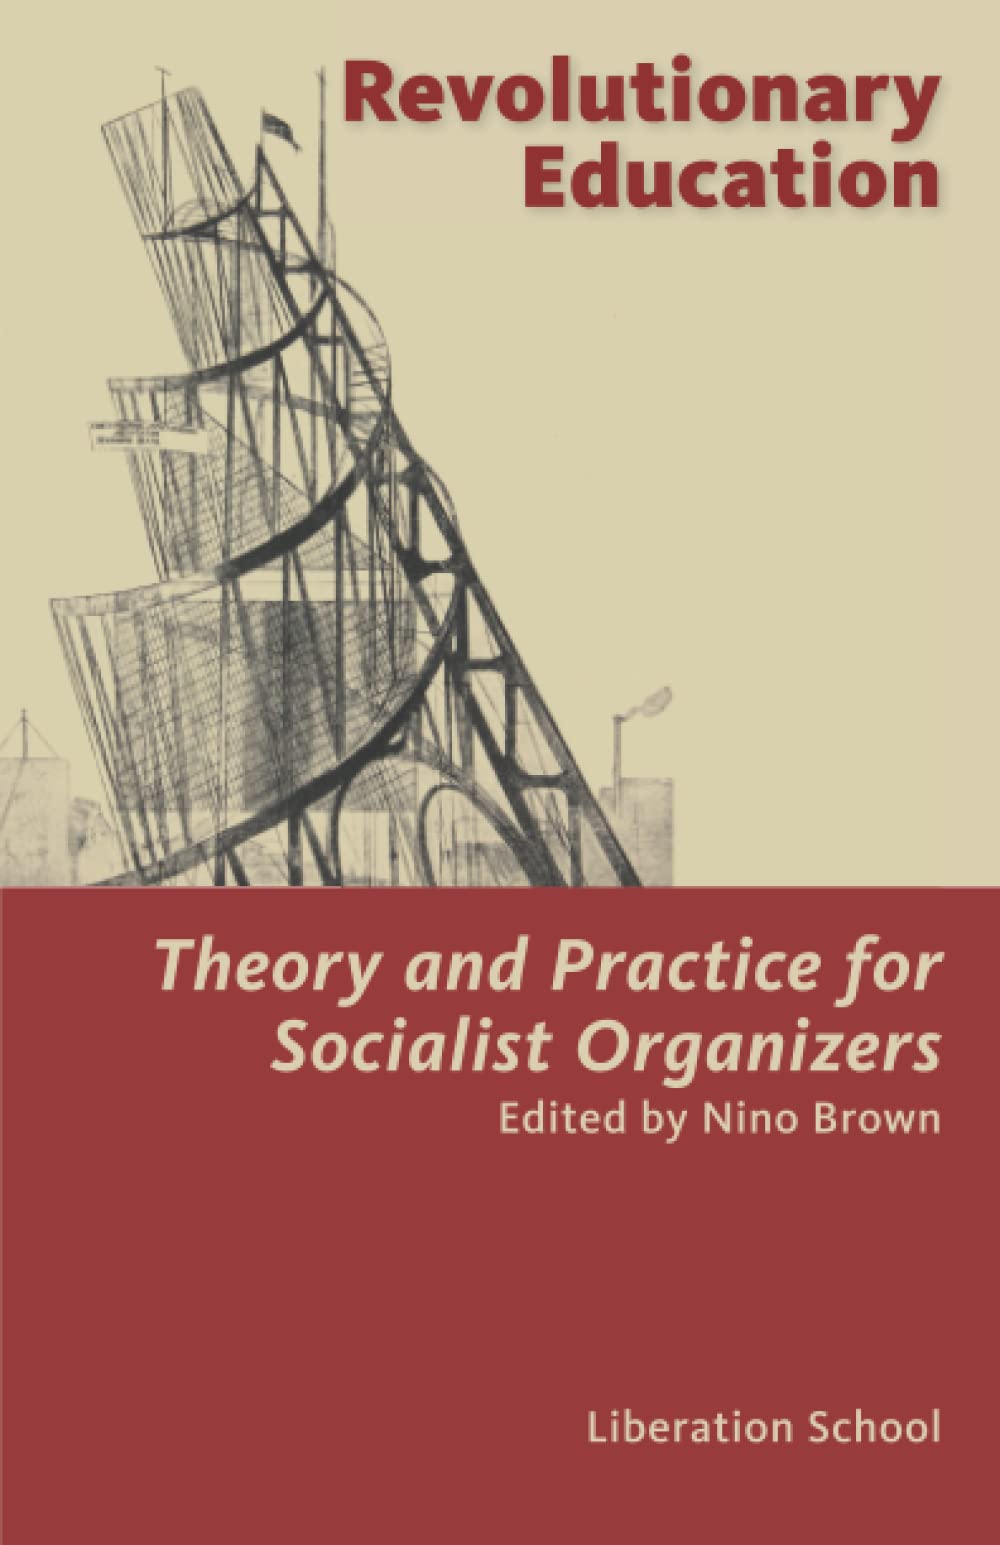 Revolutionary Education: Theory and Practice for Socialist Organizers